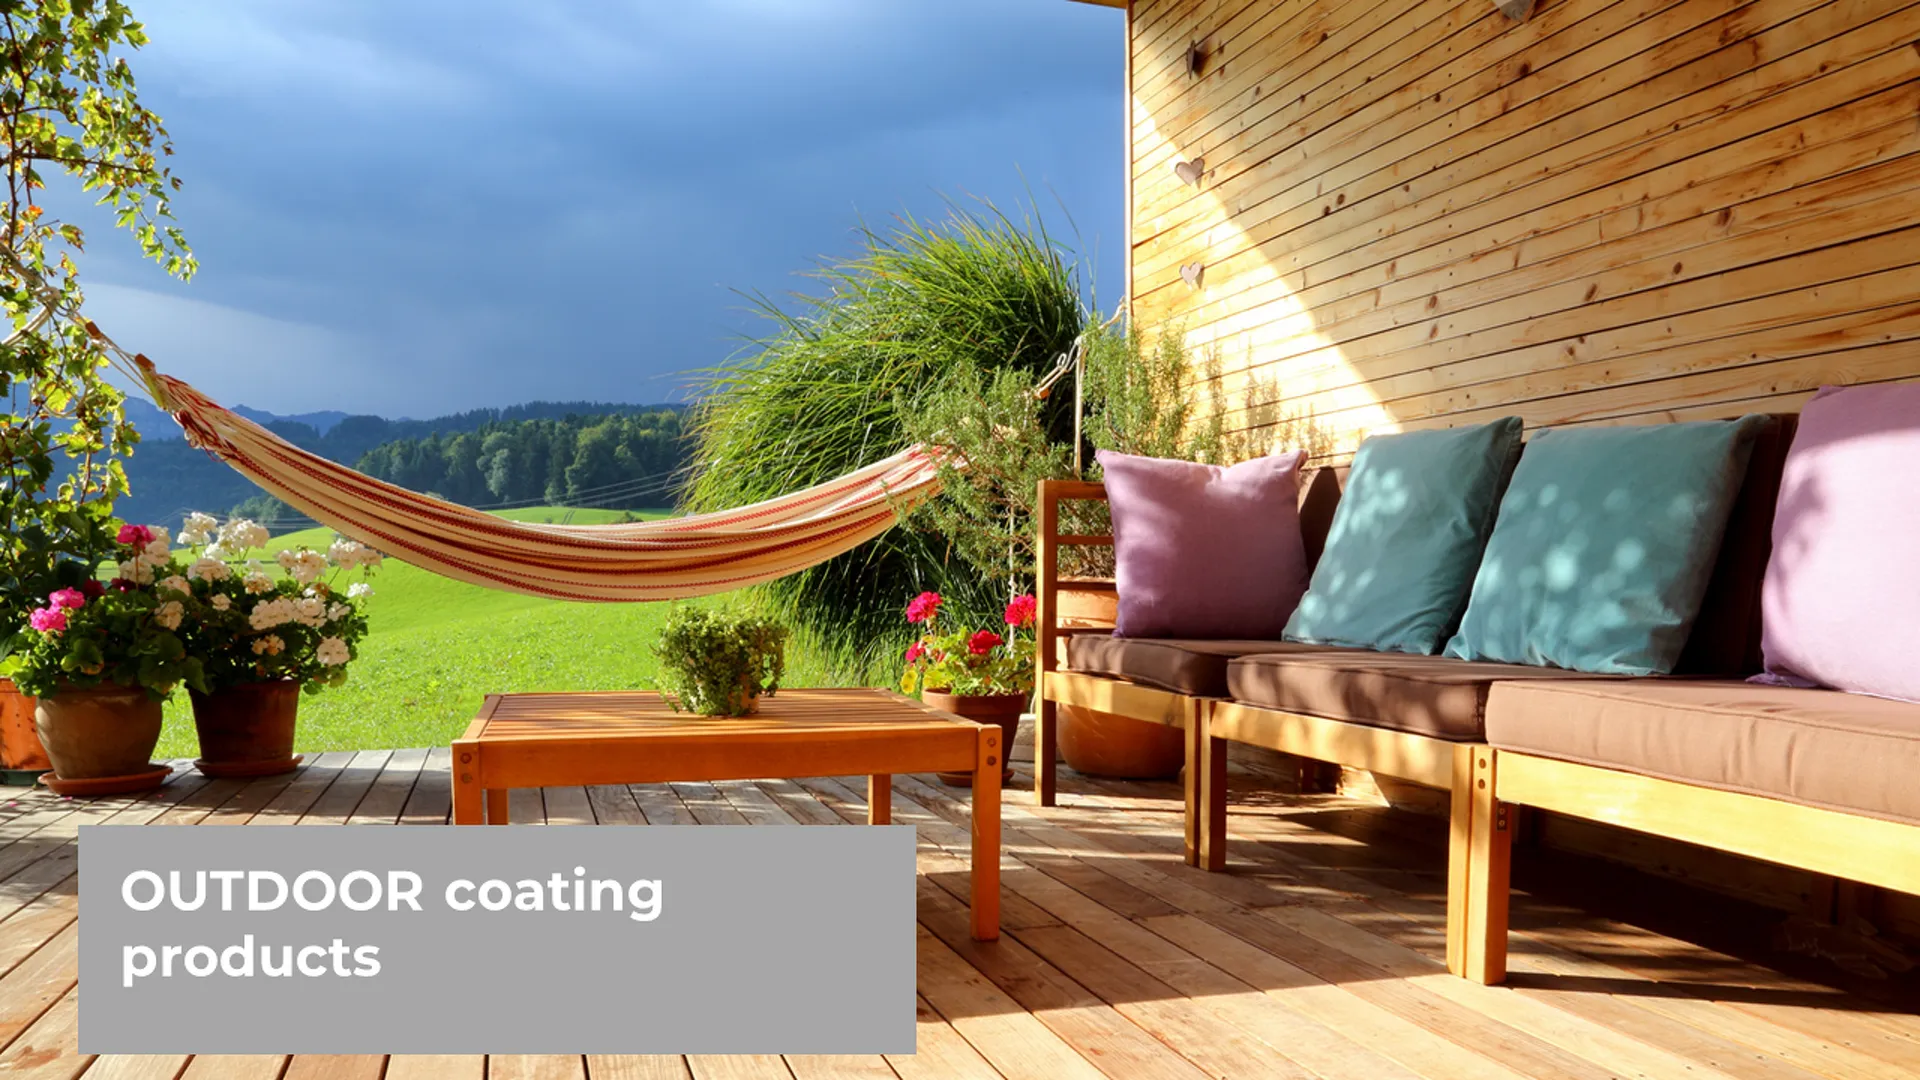 OUTDOOR COATING PRODUCTS